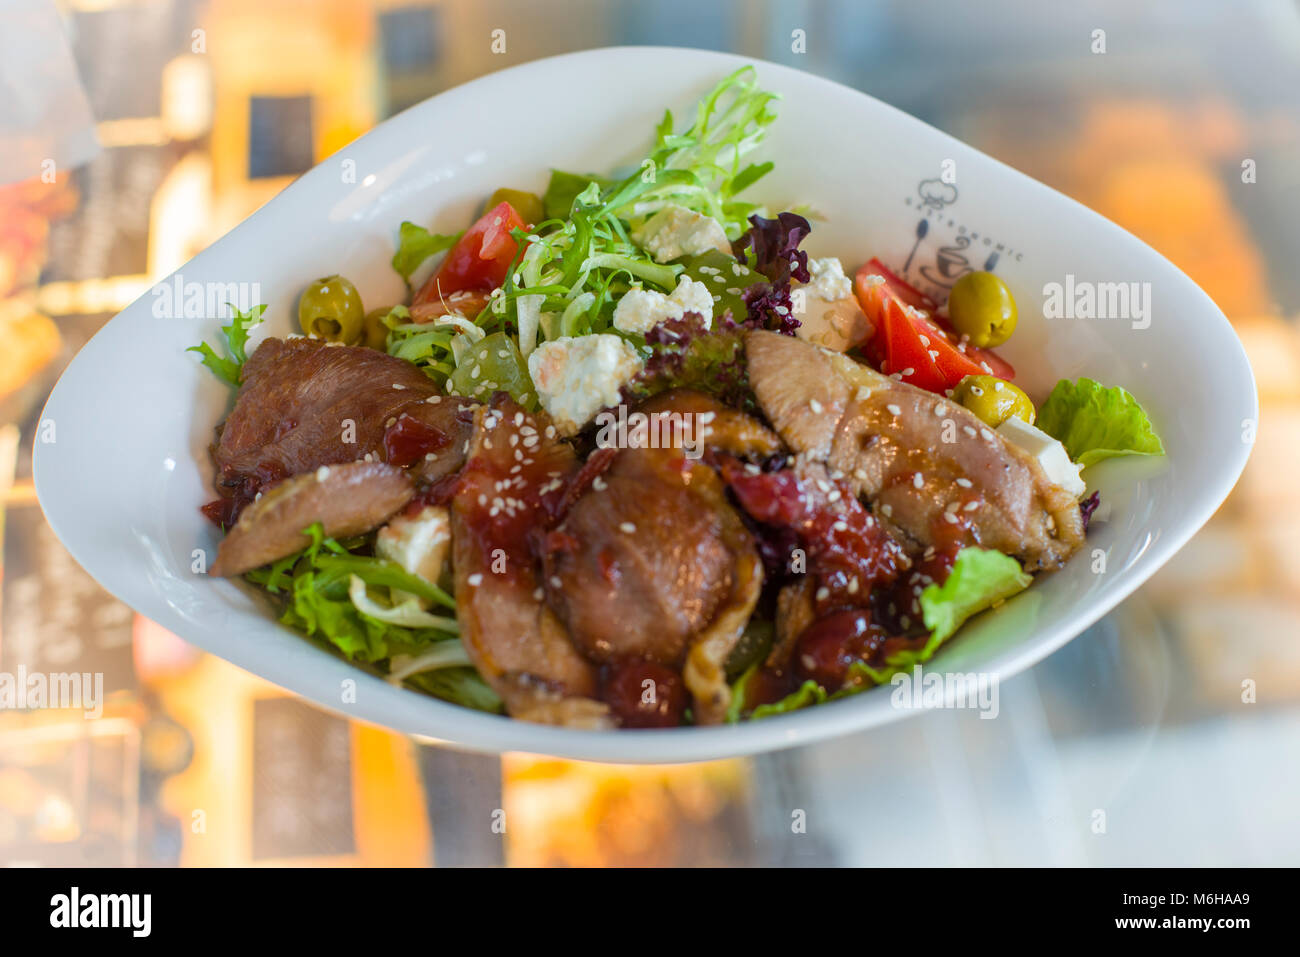 MIxed vegetable and meat salad in elegant dish Stock Photo